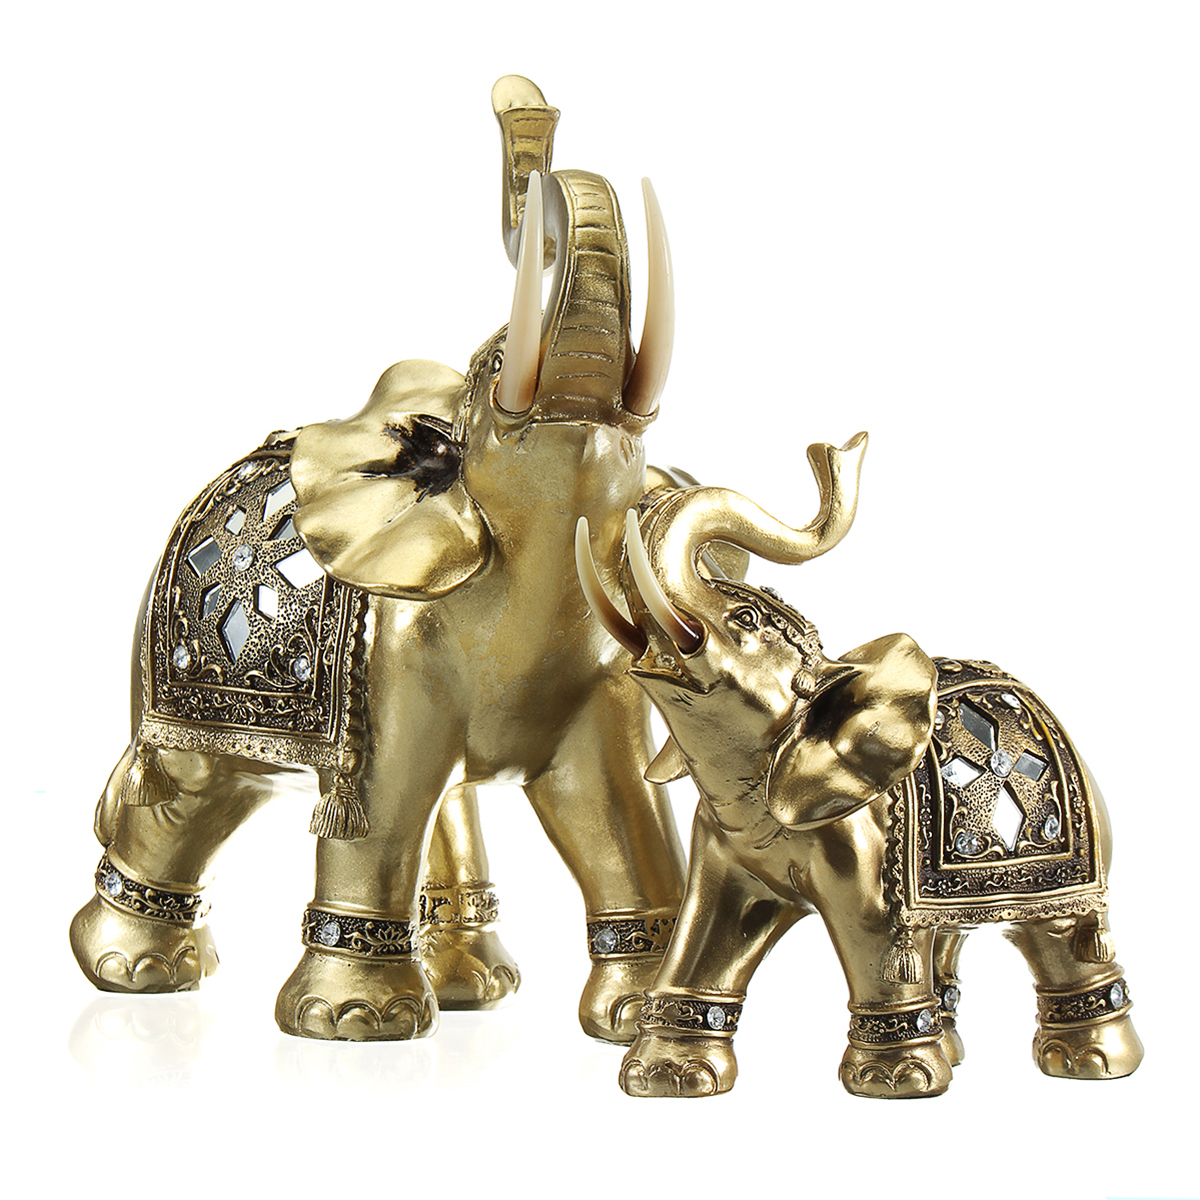 Lucky-Charm-Fengshui-Mascot-Golden-Elephant-Resin-Mini-Statue-Home-Desk-Ornaments-Gifts-Home-Decorat-1634232-6